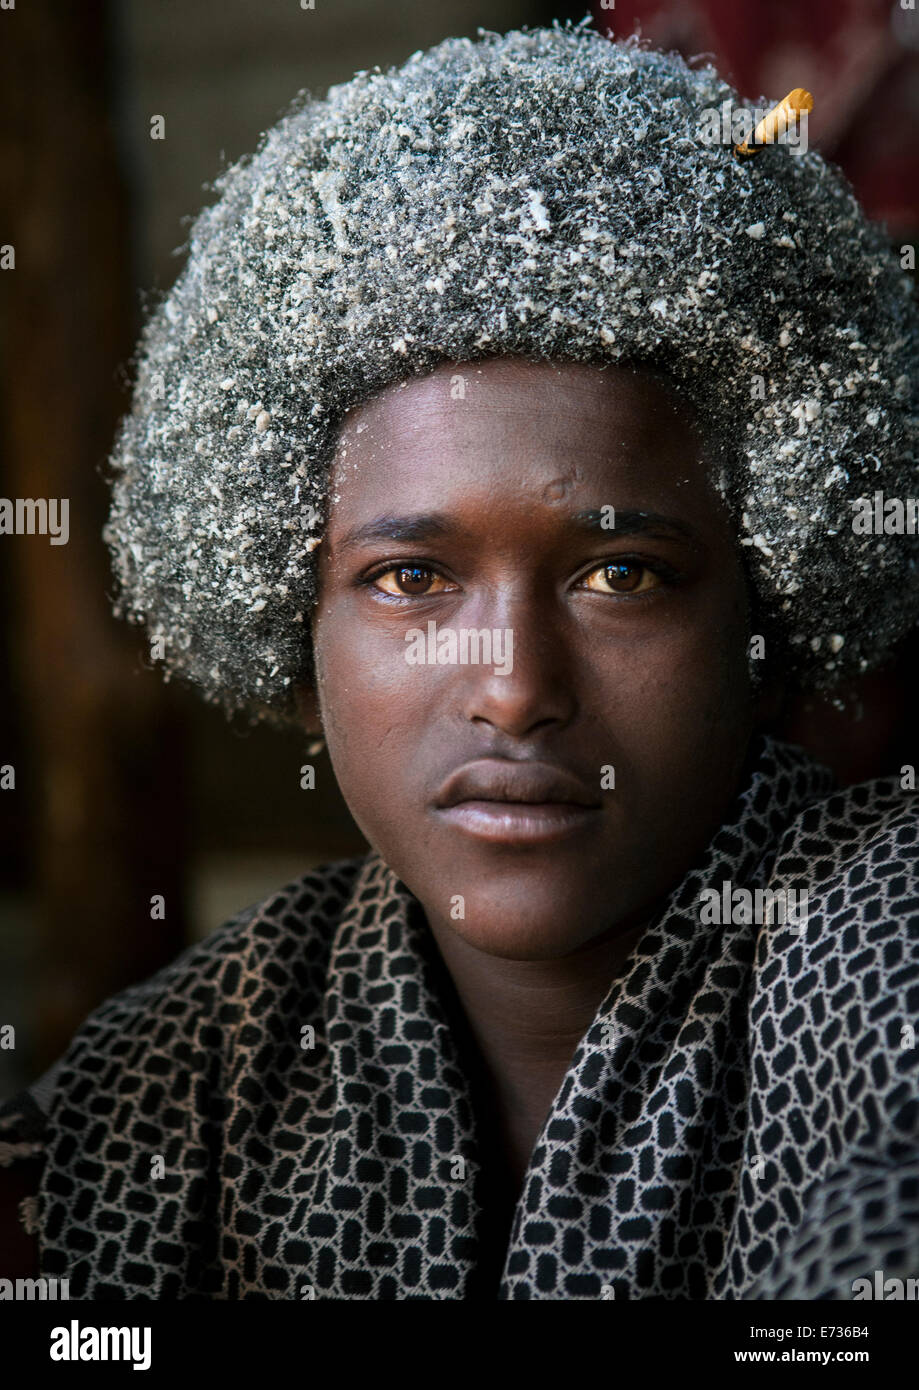 Download preview image - mr-awol-mohammed-afar-tribe-man-mille-ethiopia-E736B4